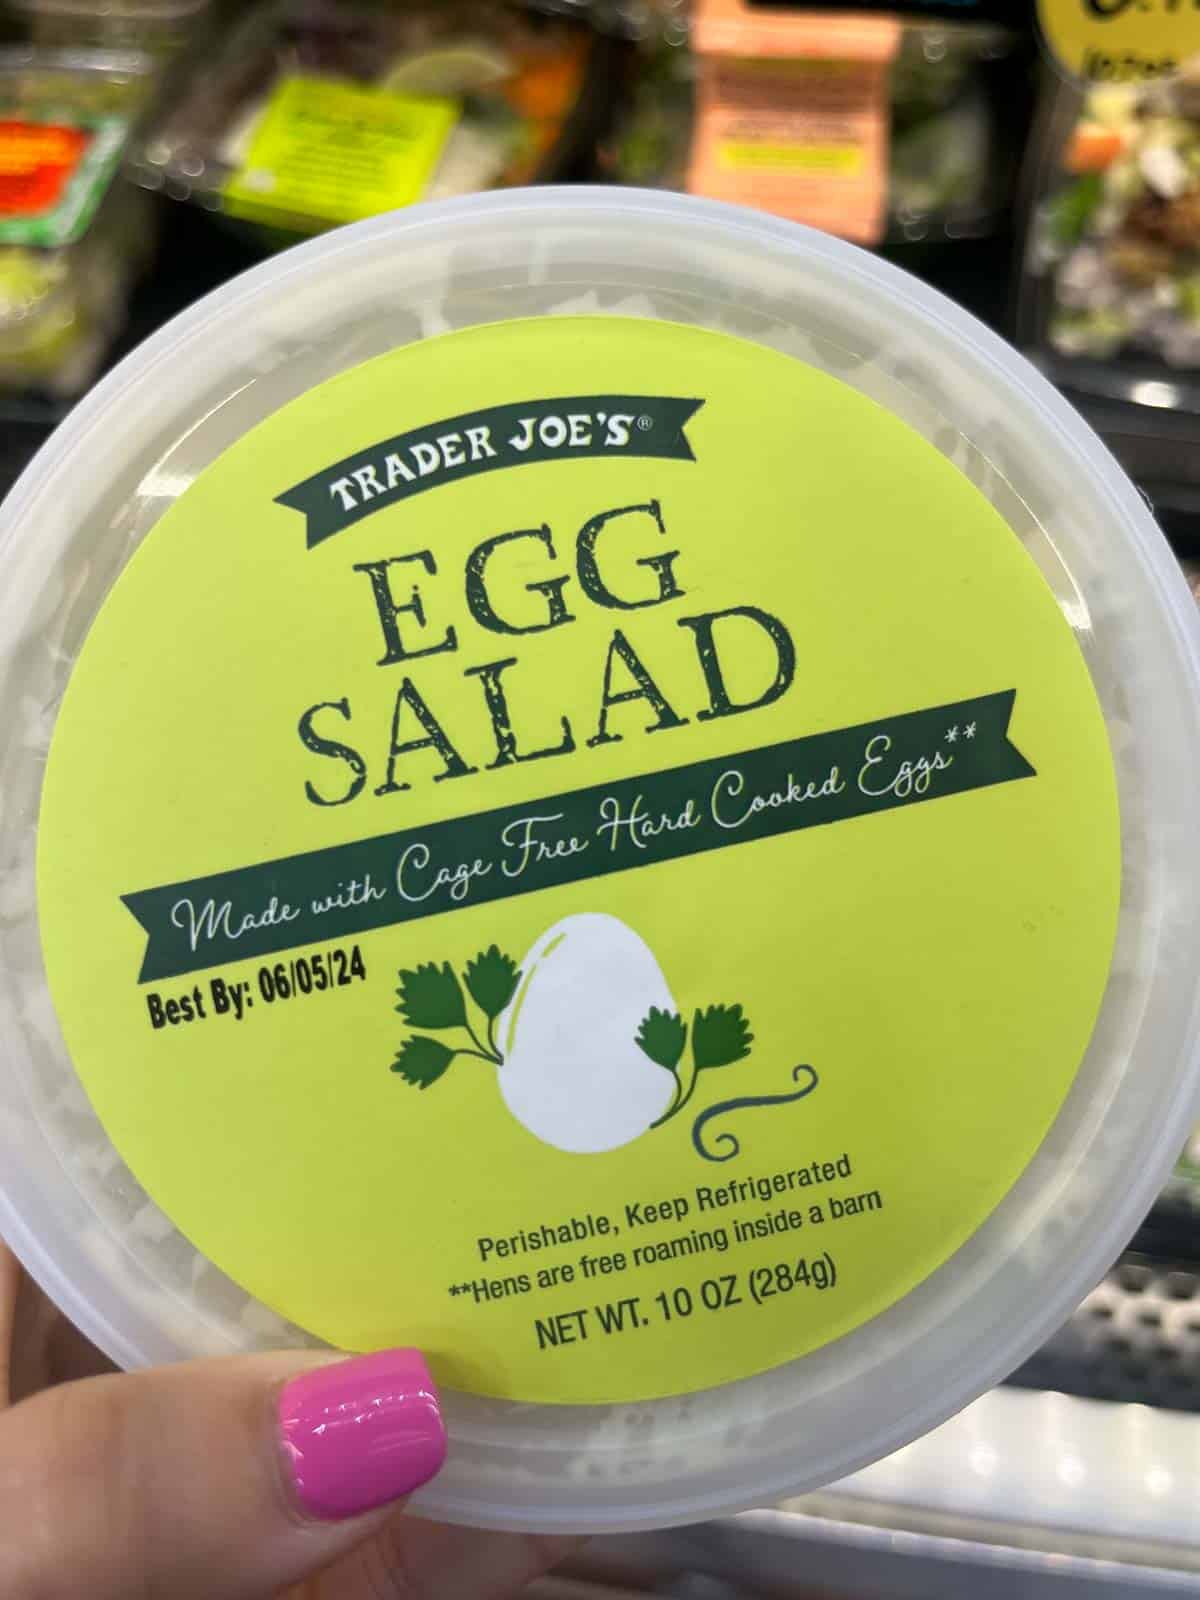 A container of Trader Joe's Egg Salad.